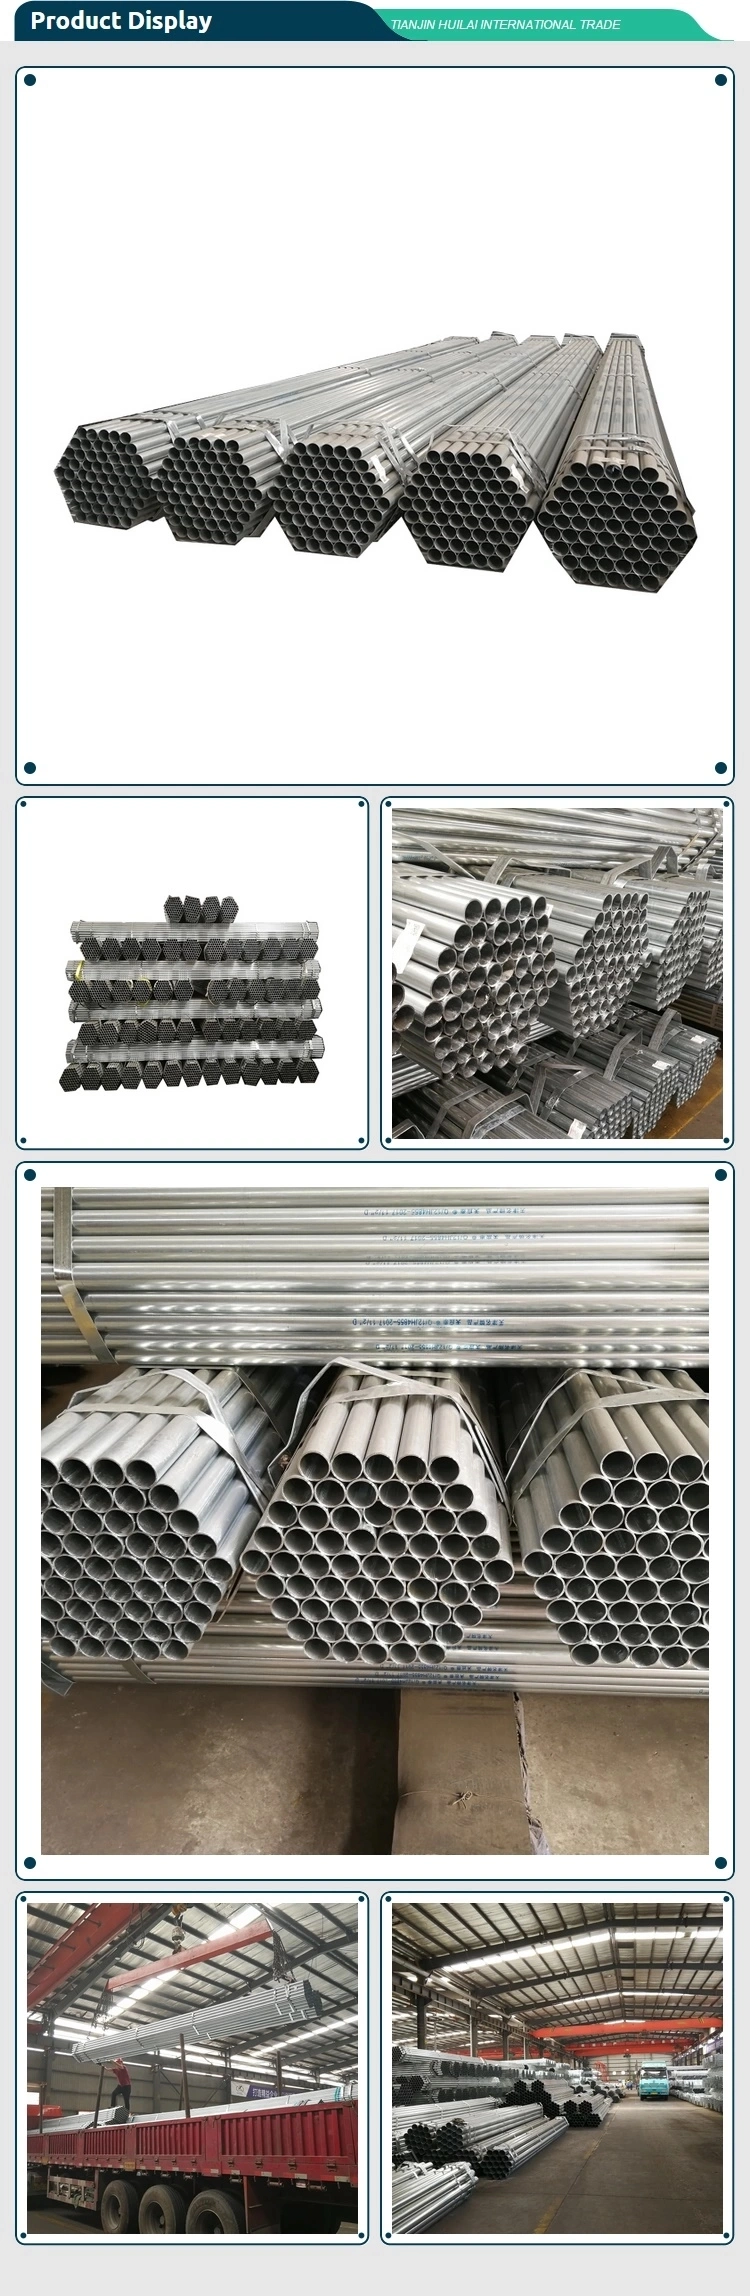 Structural Steel Tubes/Scaffolding Tubes, ASTM A795, a/B, Sch10/30/40 Grades, Paint/Hot Dipe Galvanized